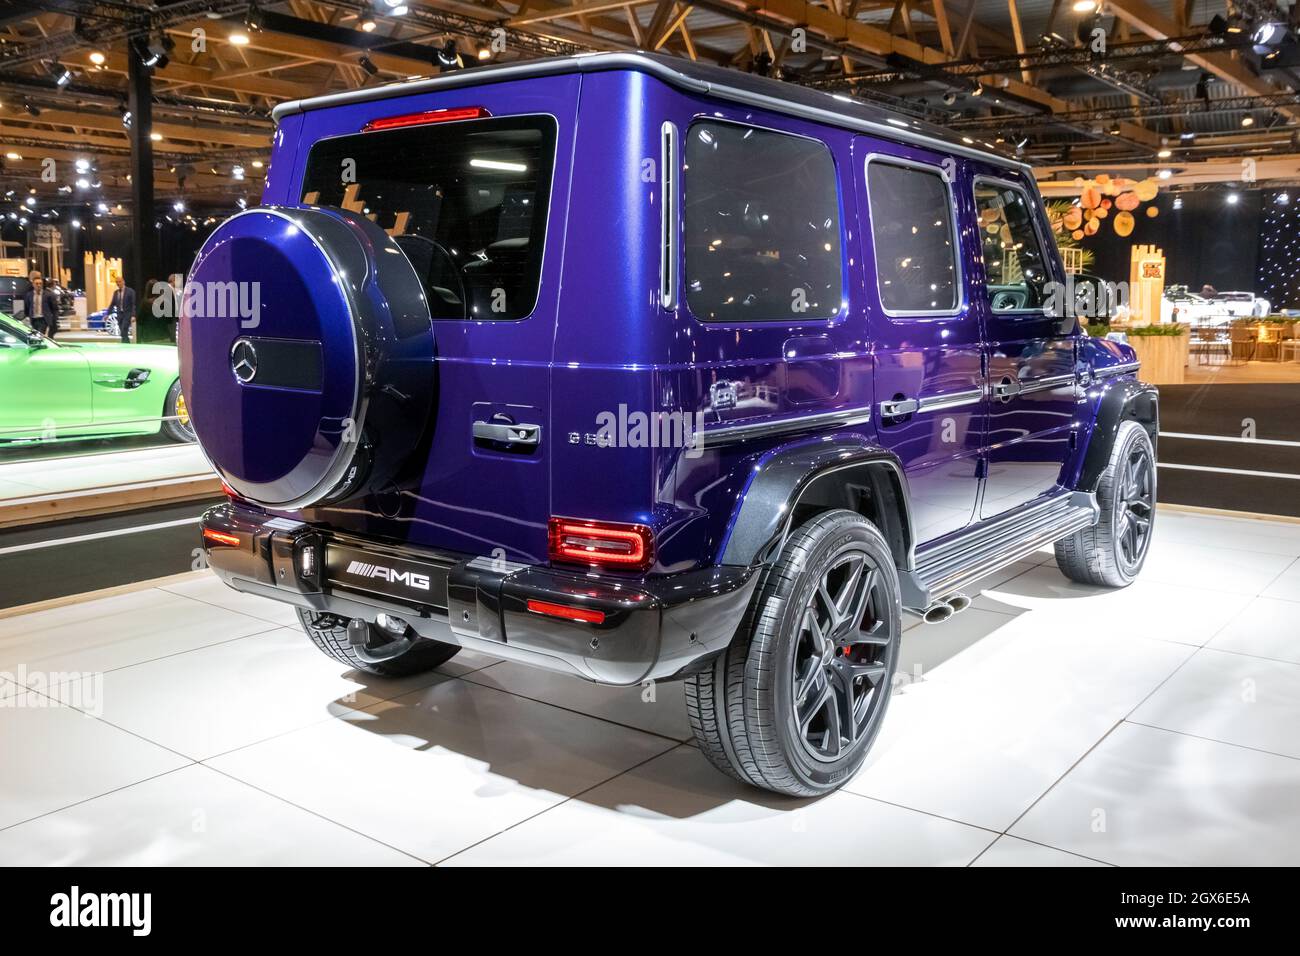 Mercedes-AMG G63 car showcased at the Autosalon 2020 Motor Show. Brussels, Belgium - January 9, 2020. Stock Photo